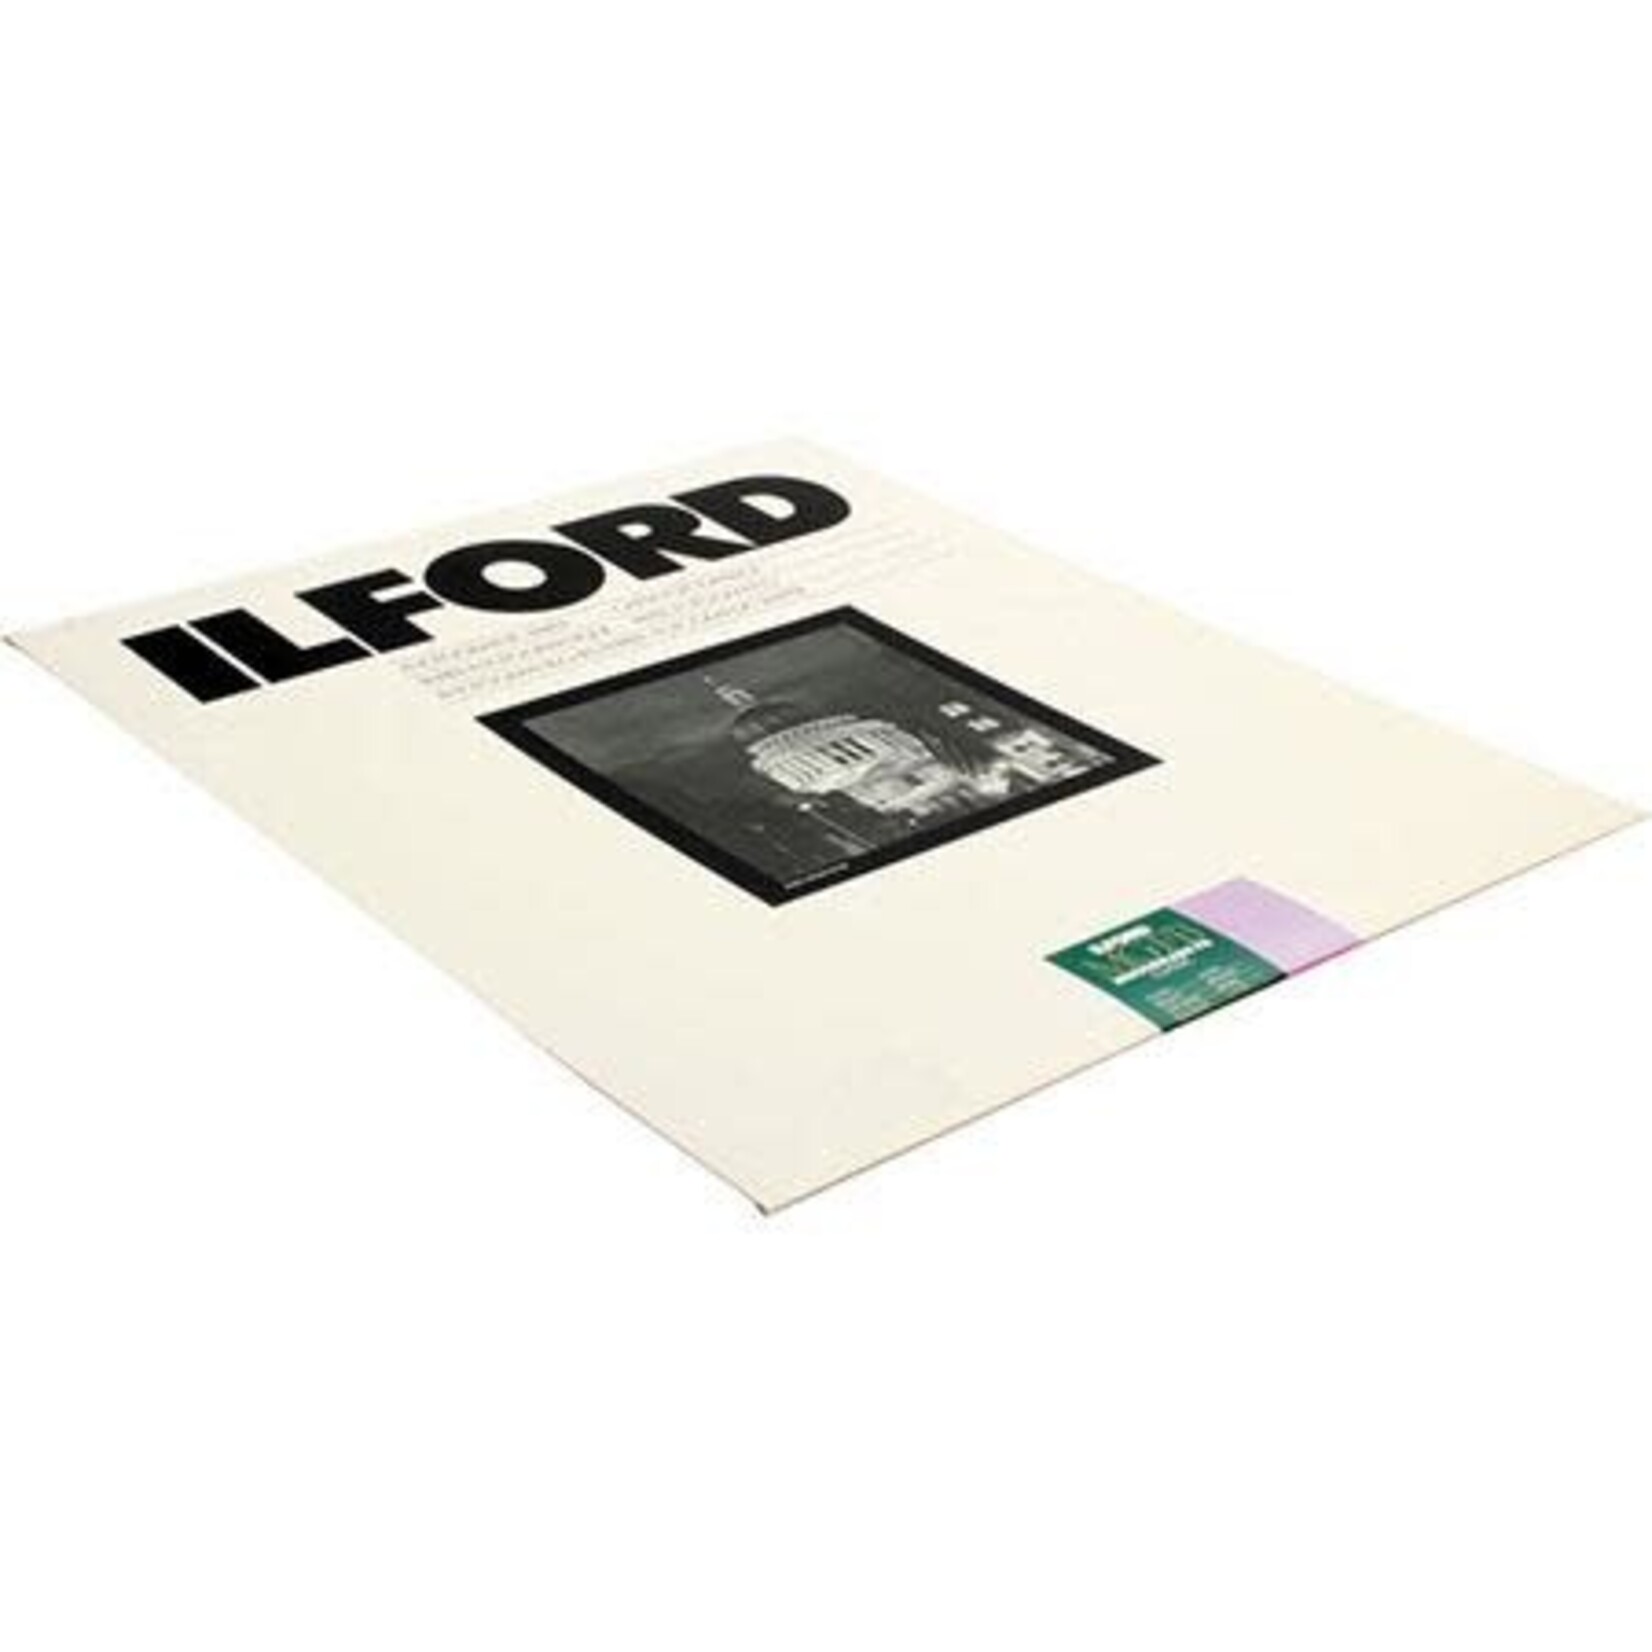 llford ILFORD 11X14 Photo Paper, 10 Sheet Pack